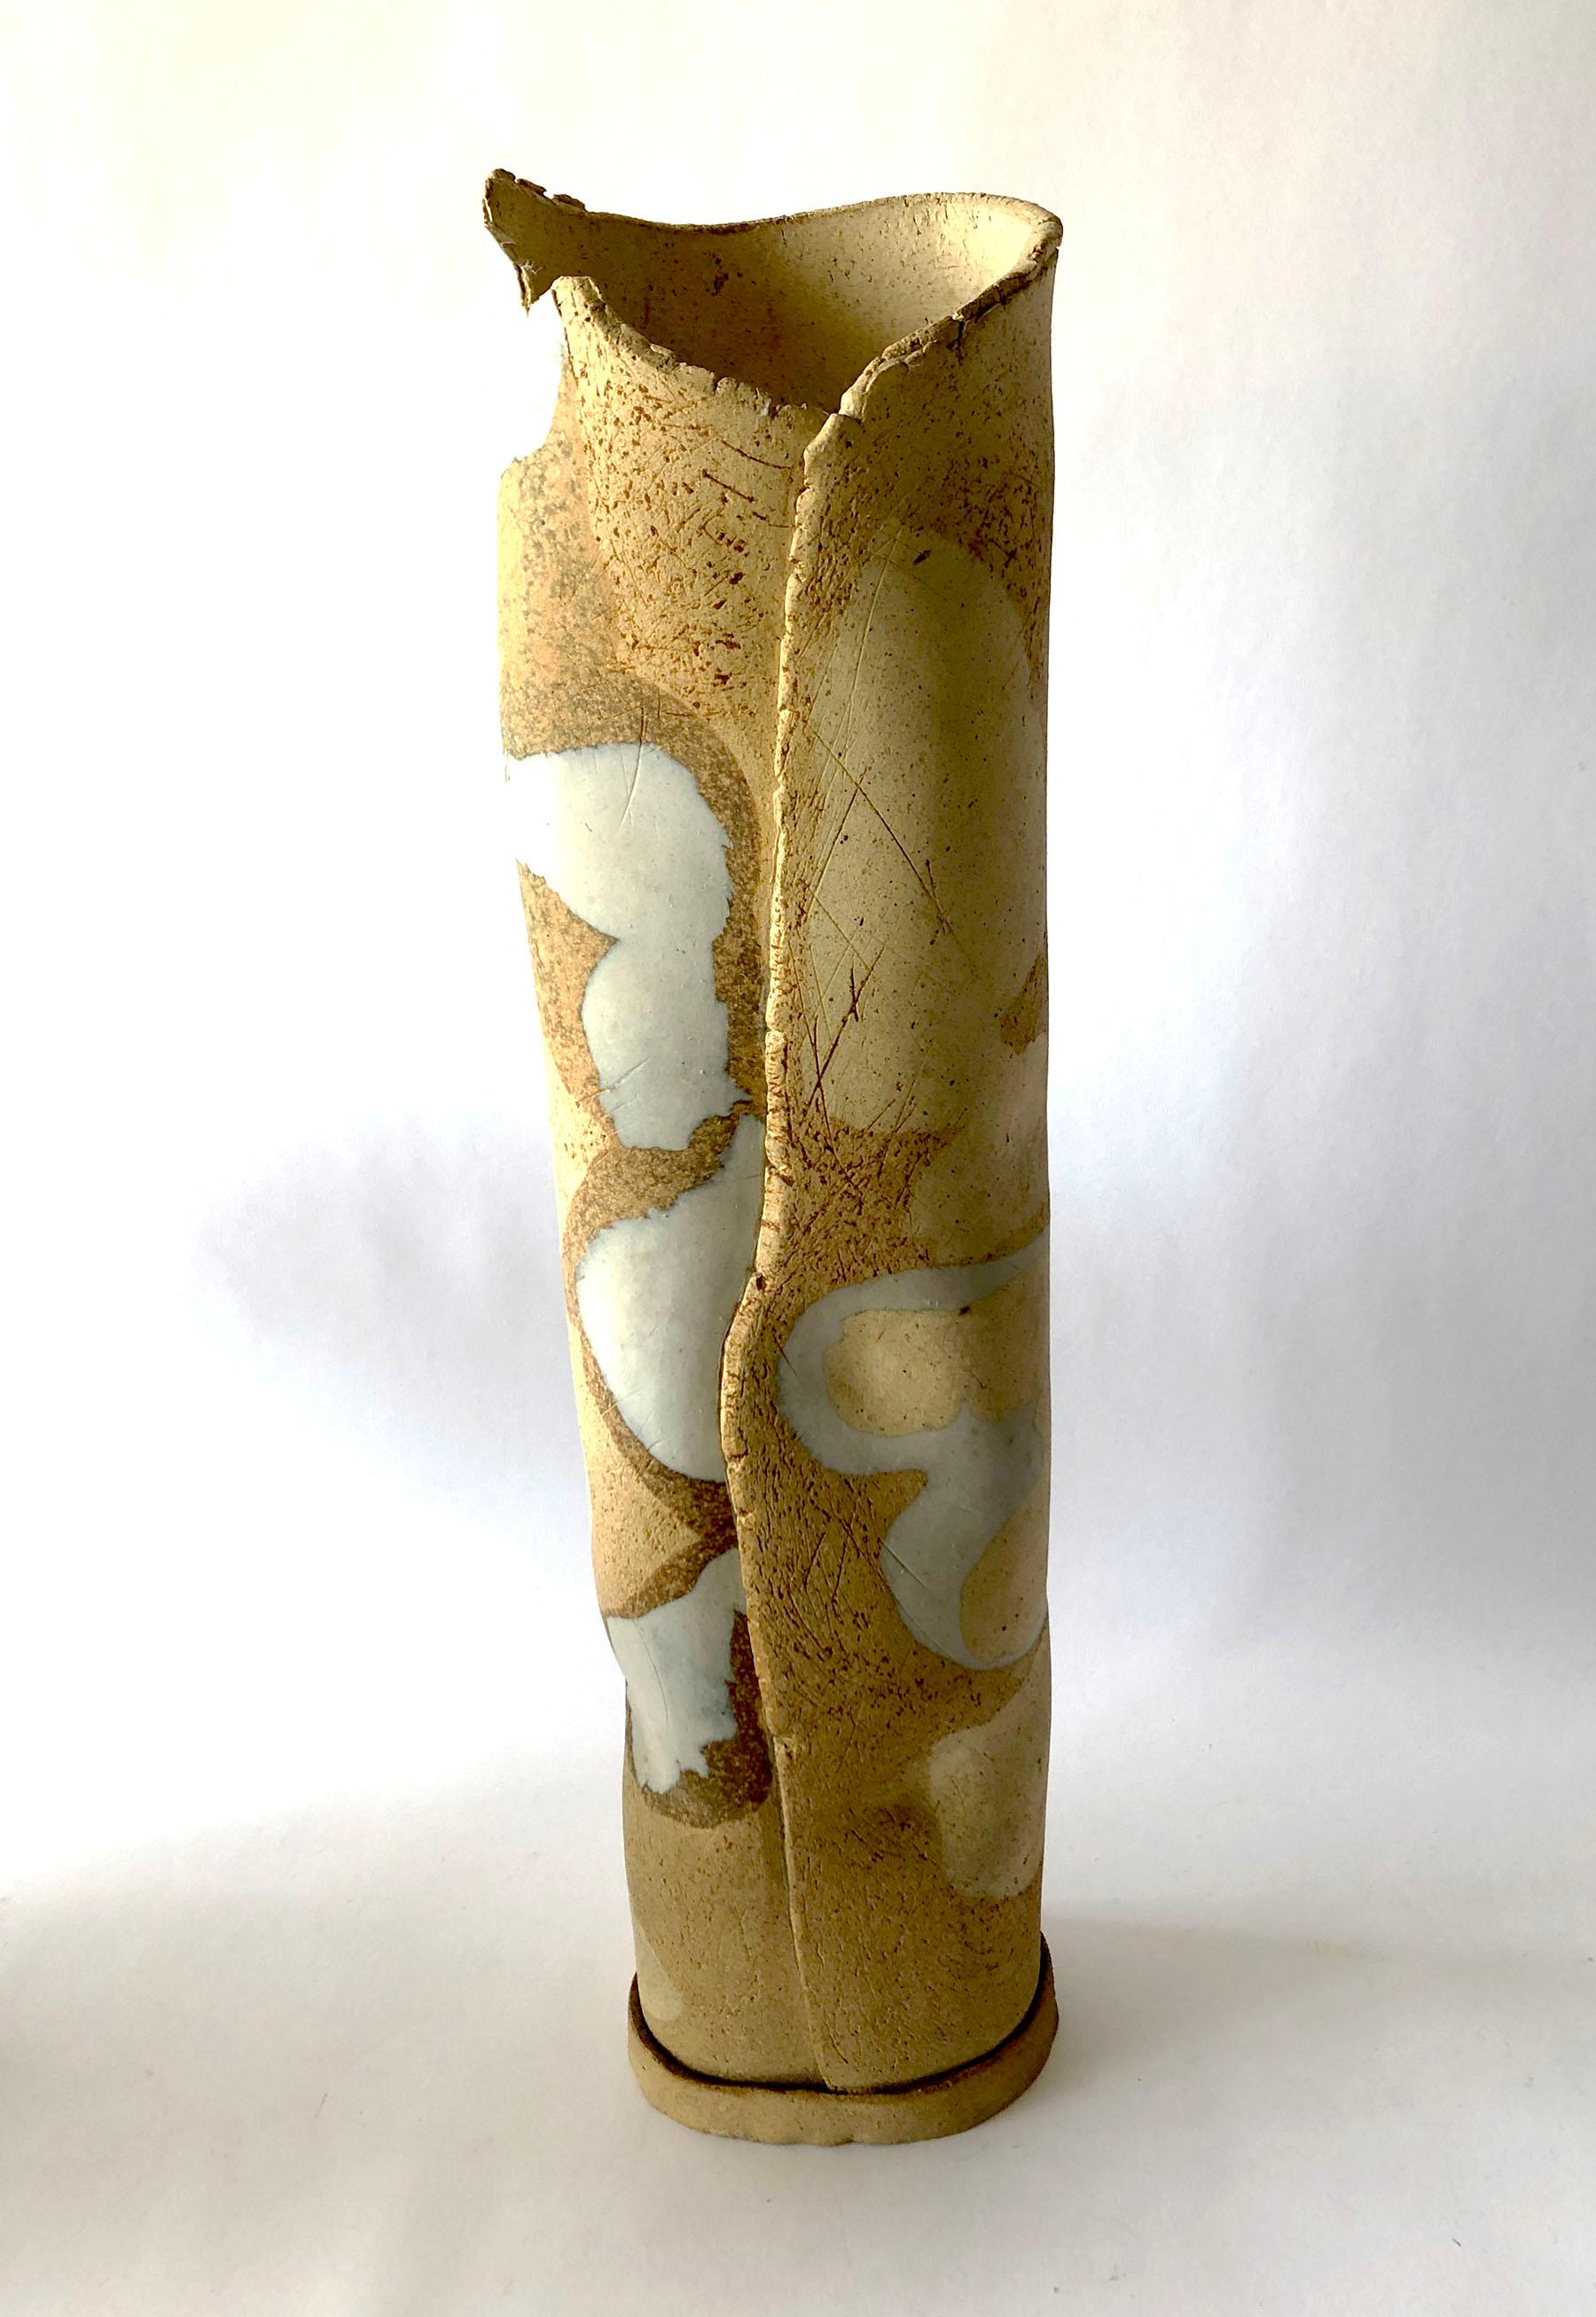 Large scale, stoneware camouflage spotted vase created by Esta James of Los Angeles, California. Vase measures 17